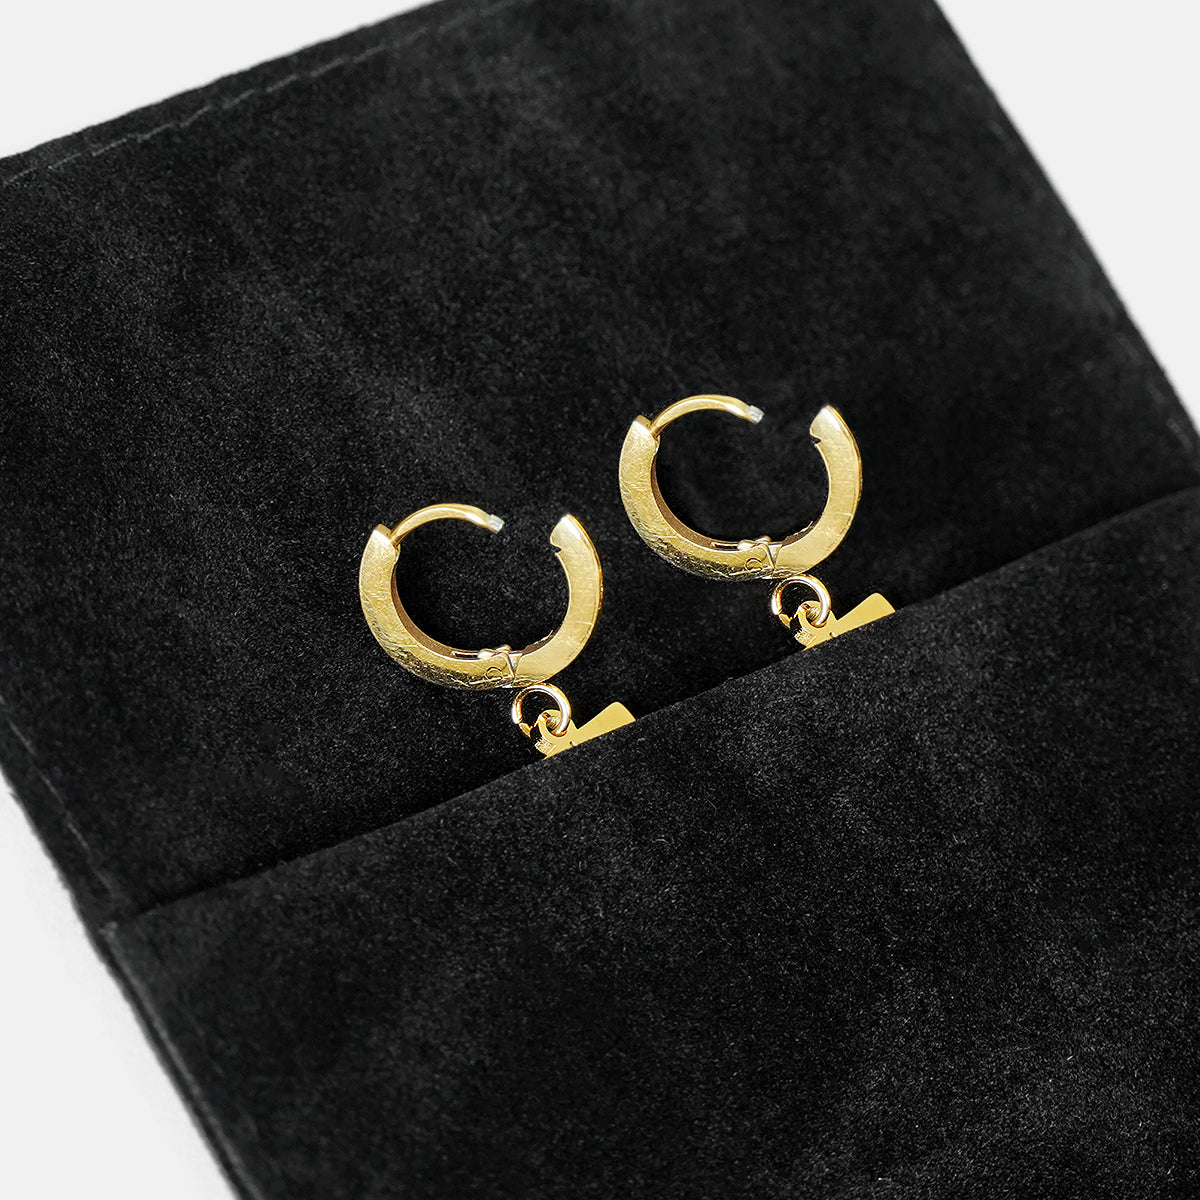 59 Number Earring - Gold Plated Stainless Steel